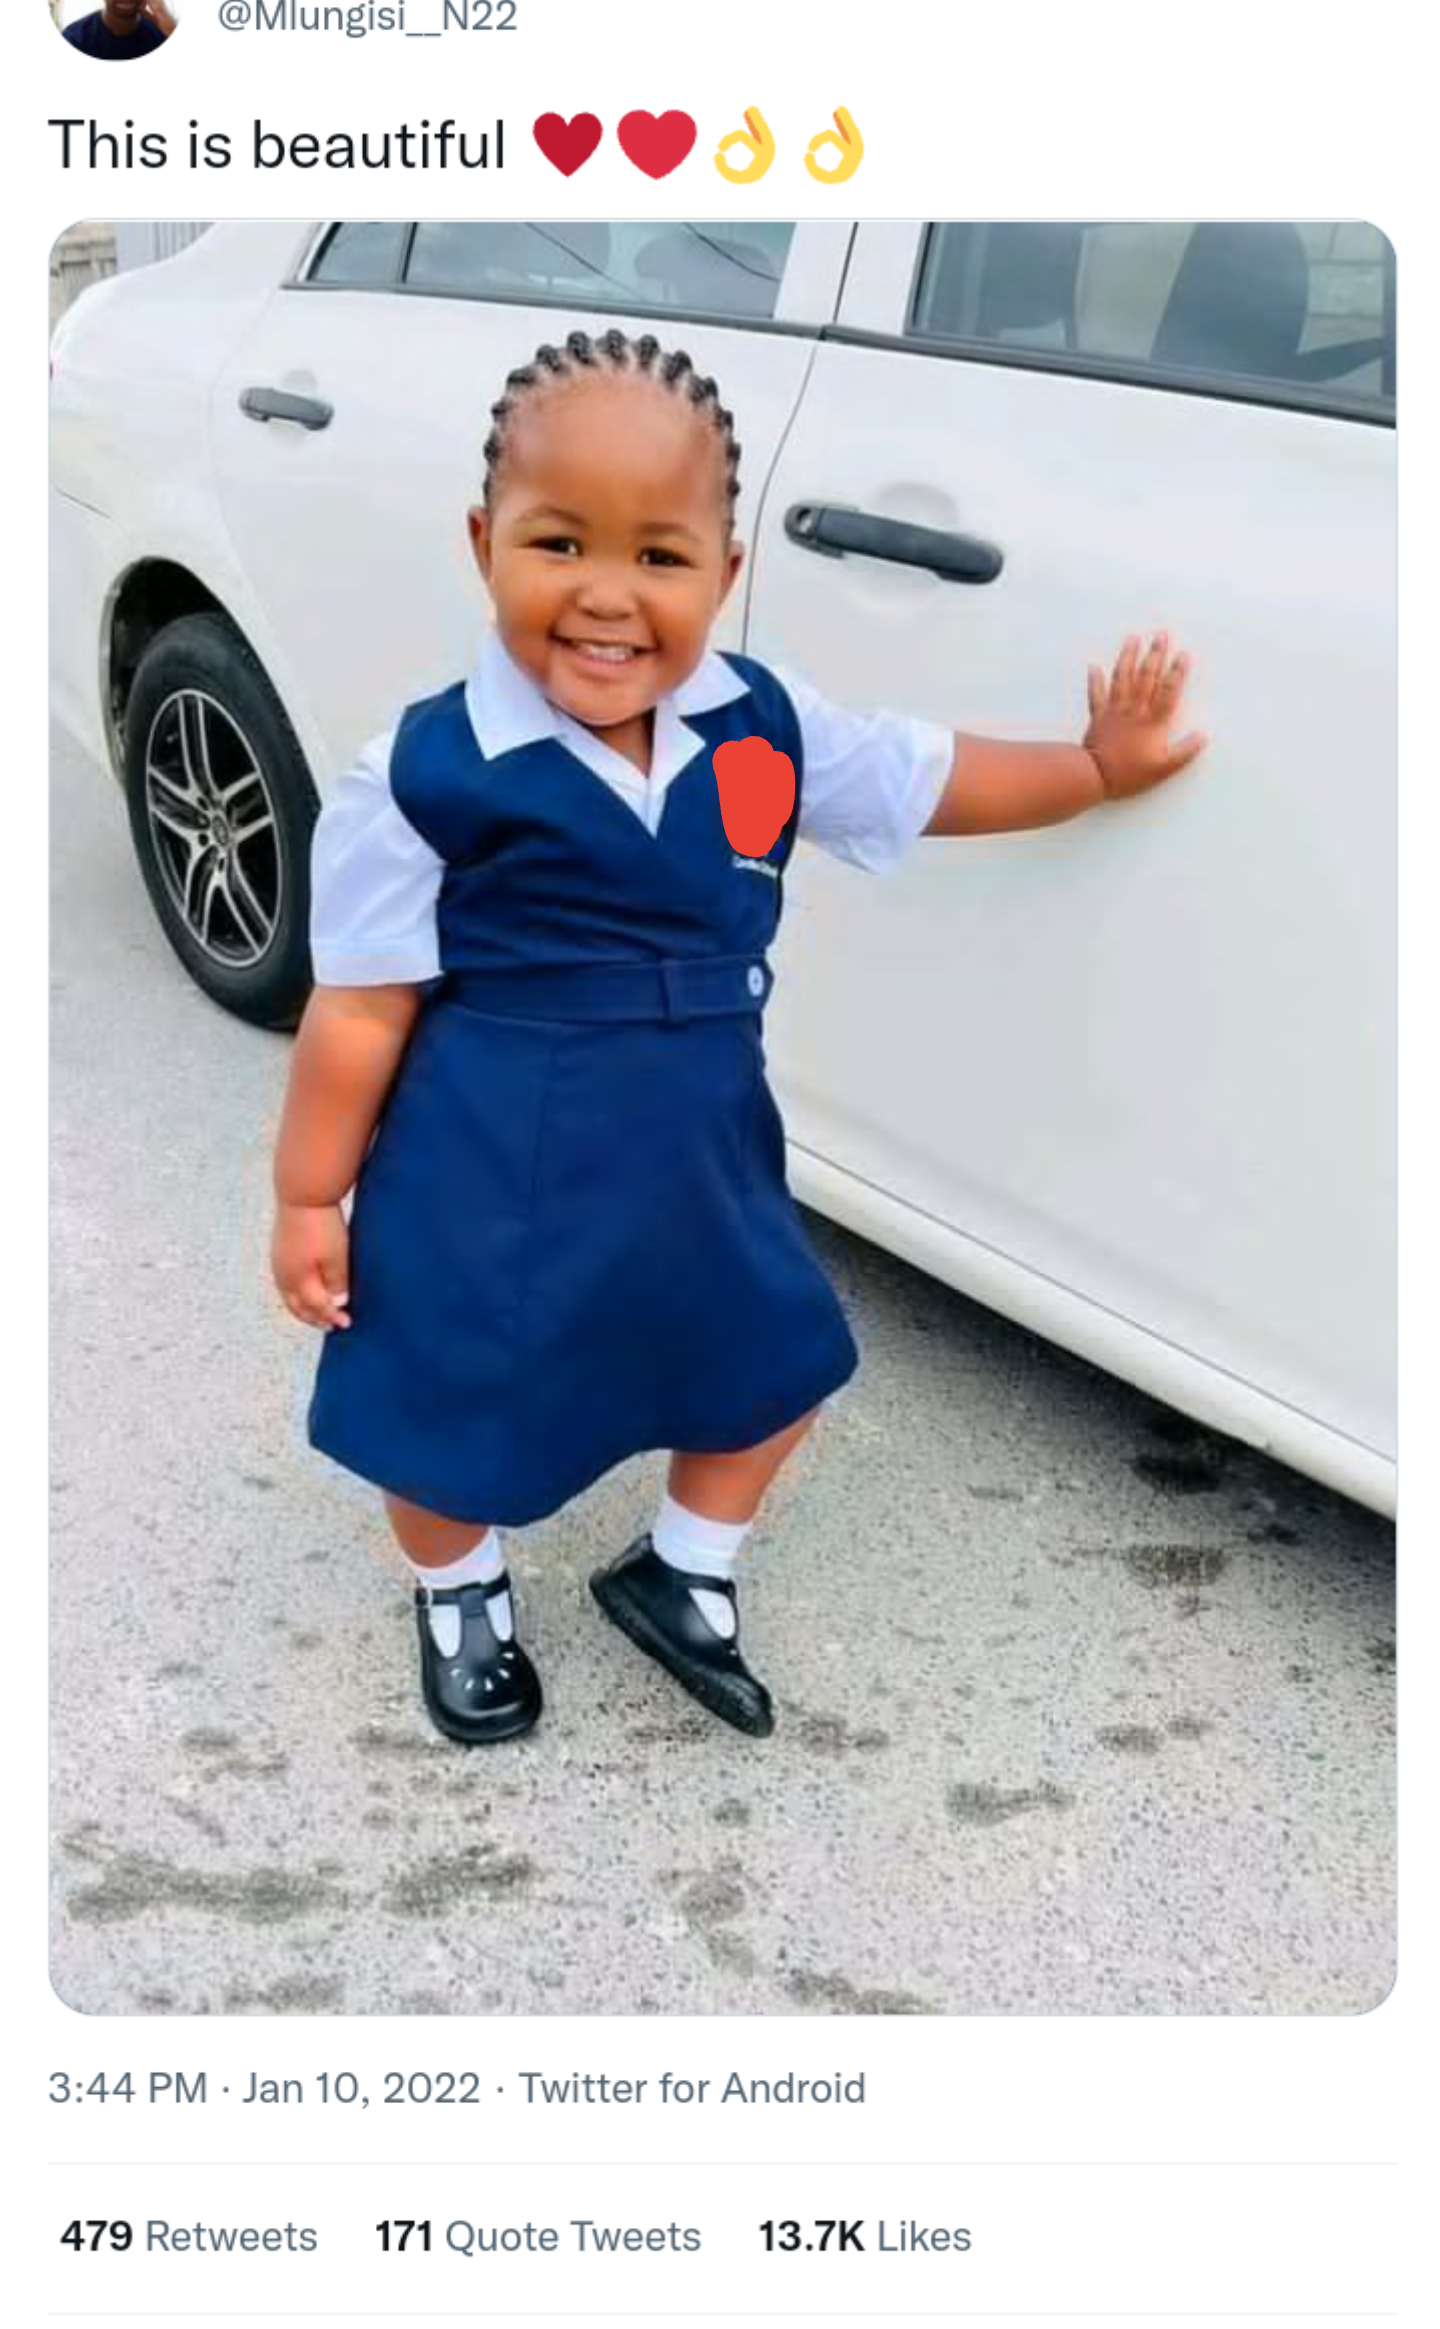 First Day Of School Photo Of Young Girl Grabs Attention On Social Media ..See How People Reacted 1